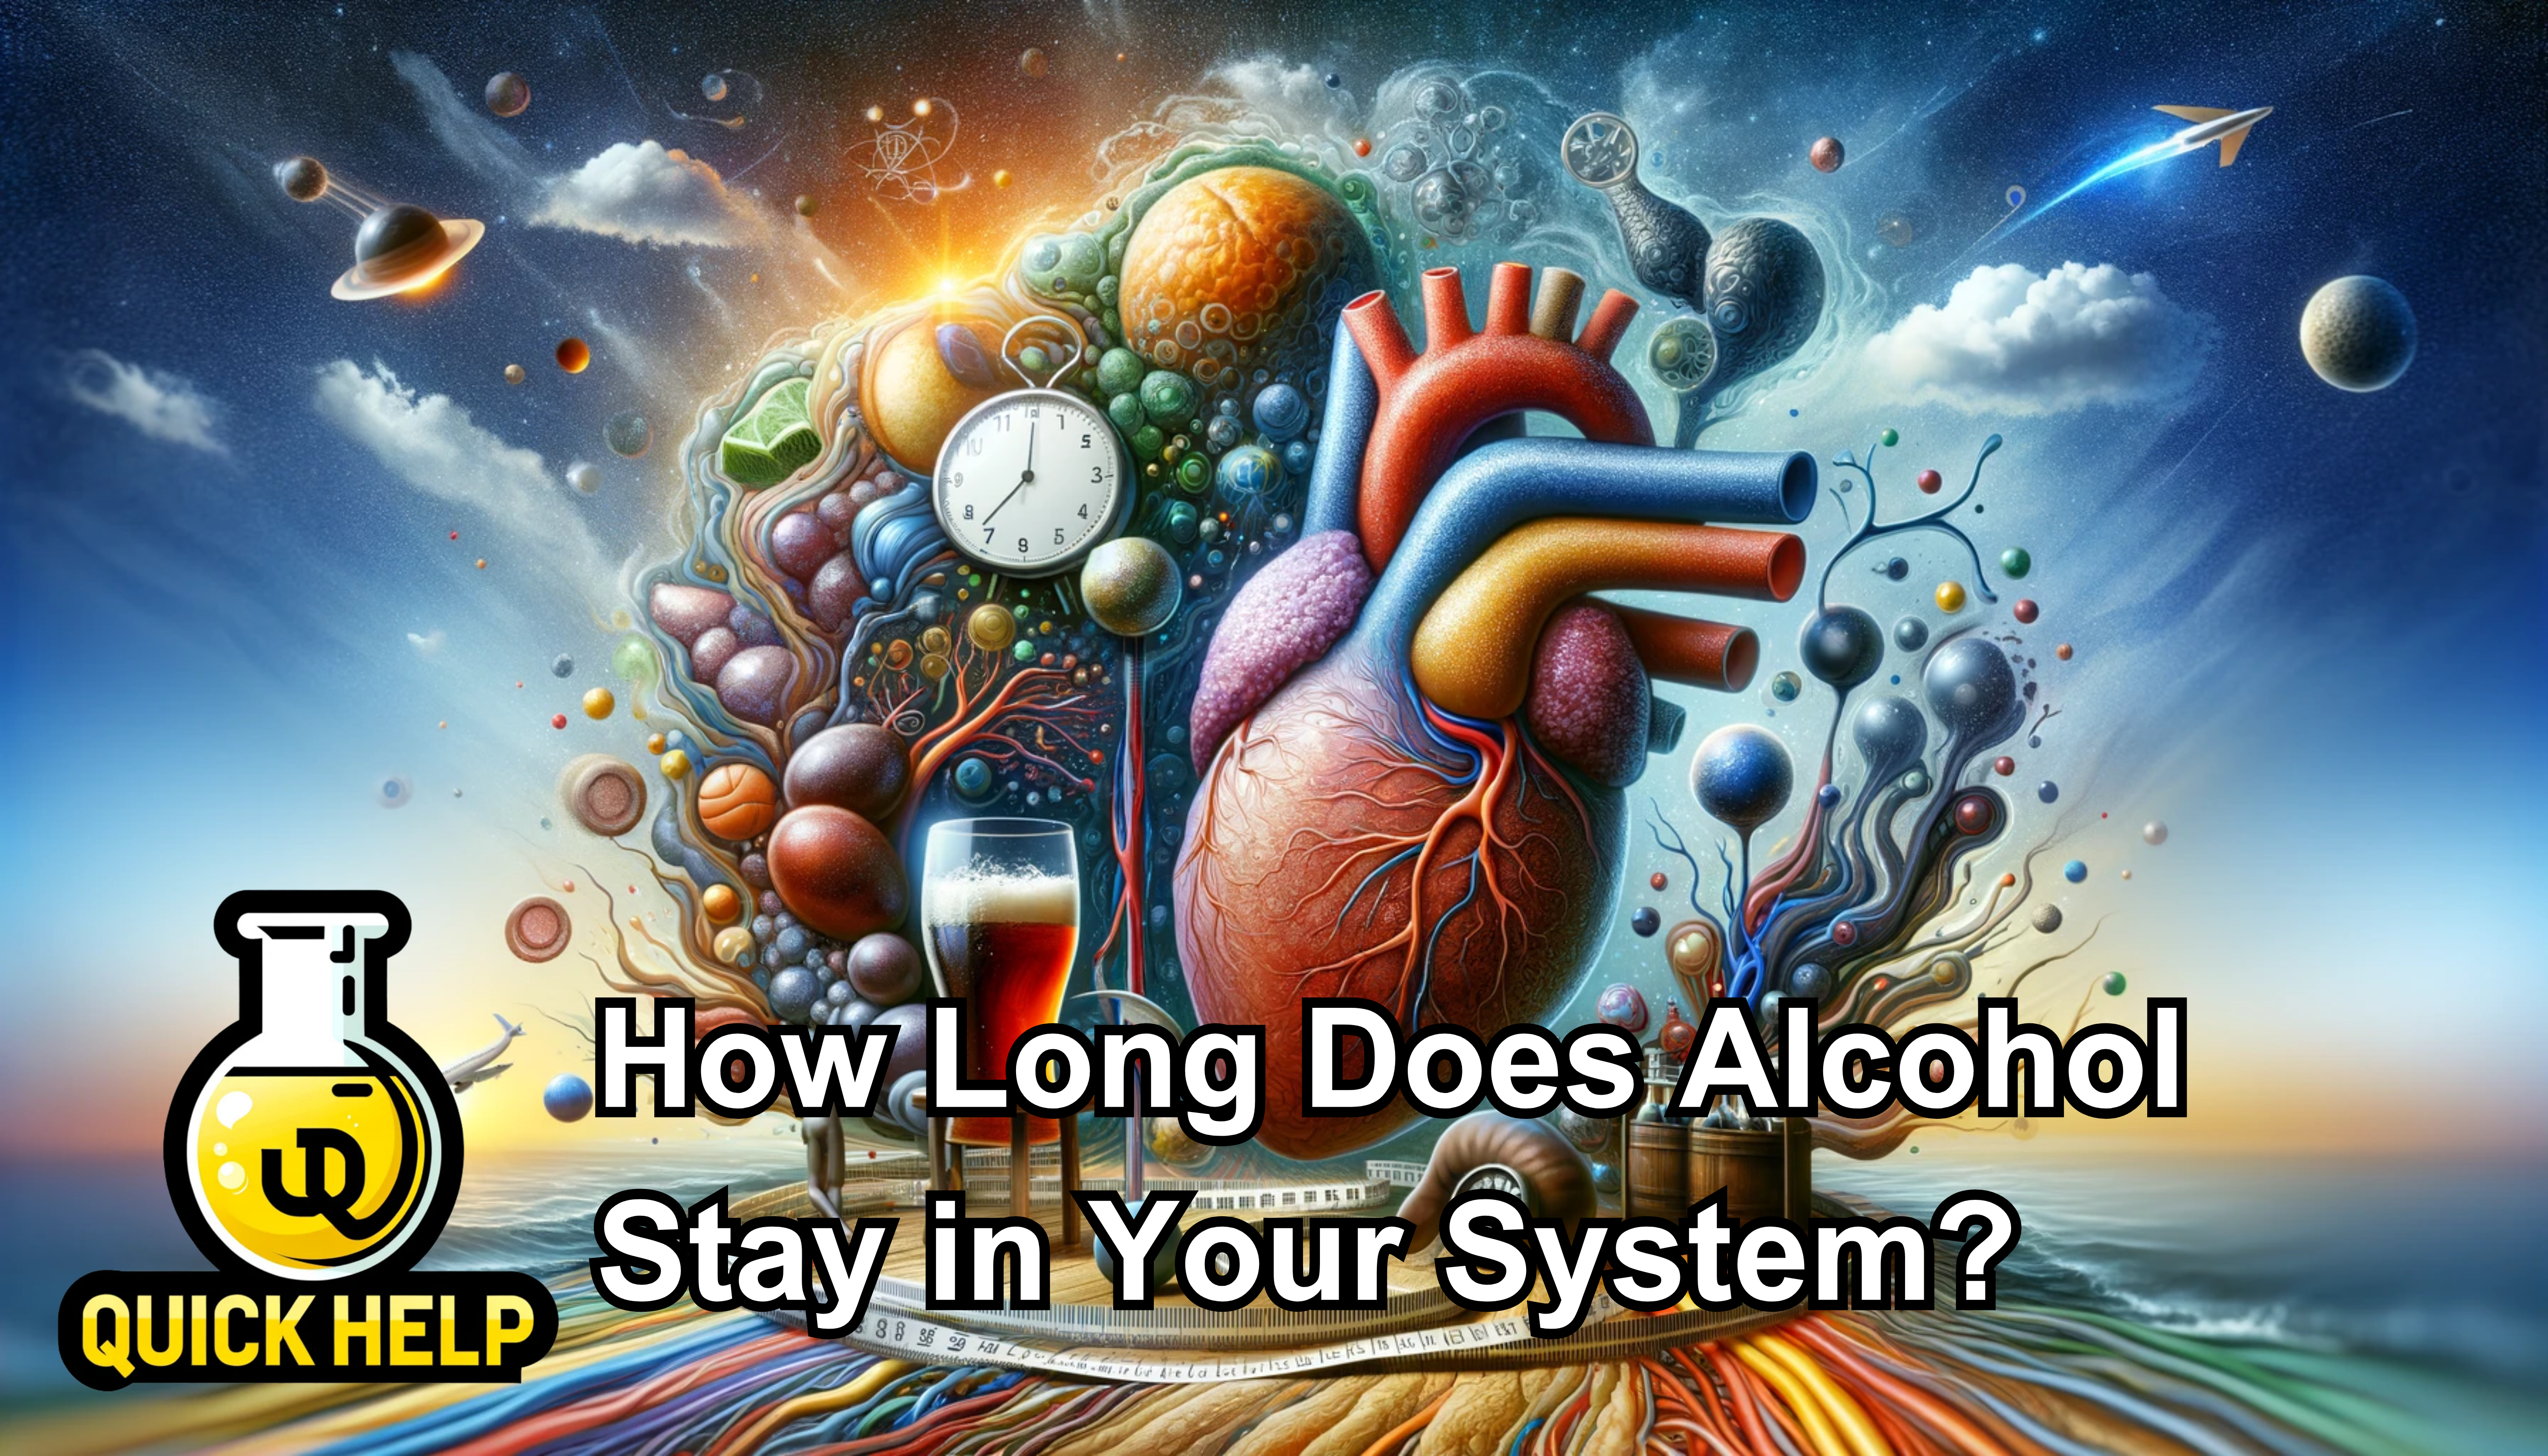 How Long Does Alcohol Stay in Your System? (Urine)